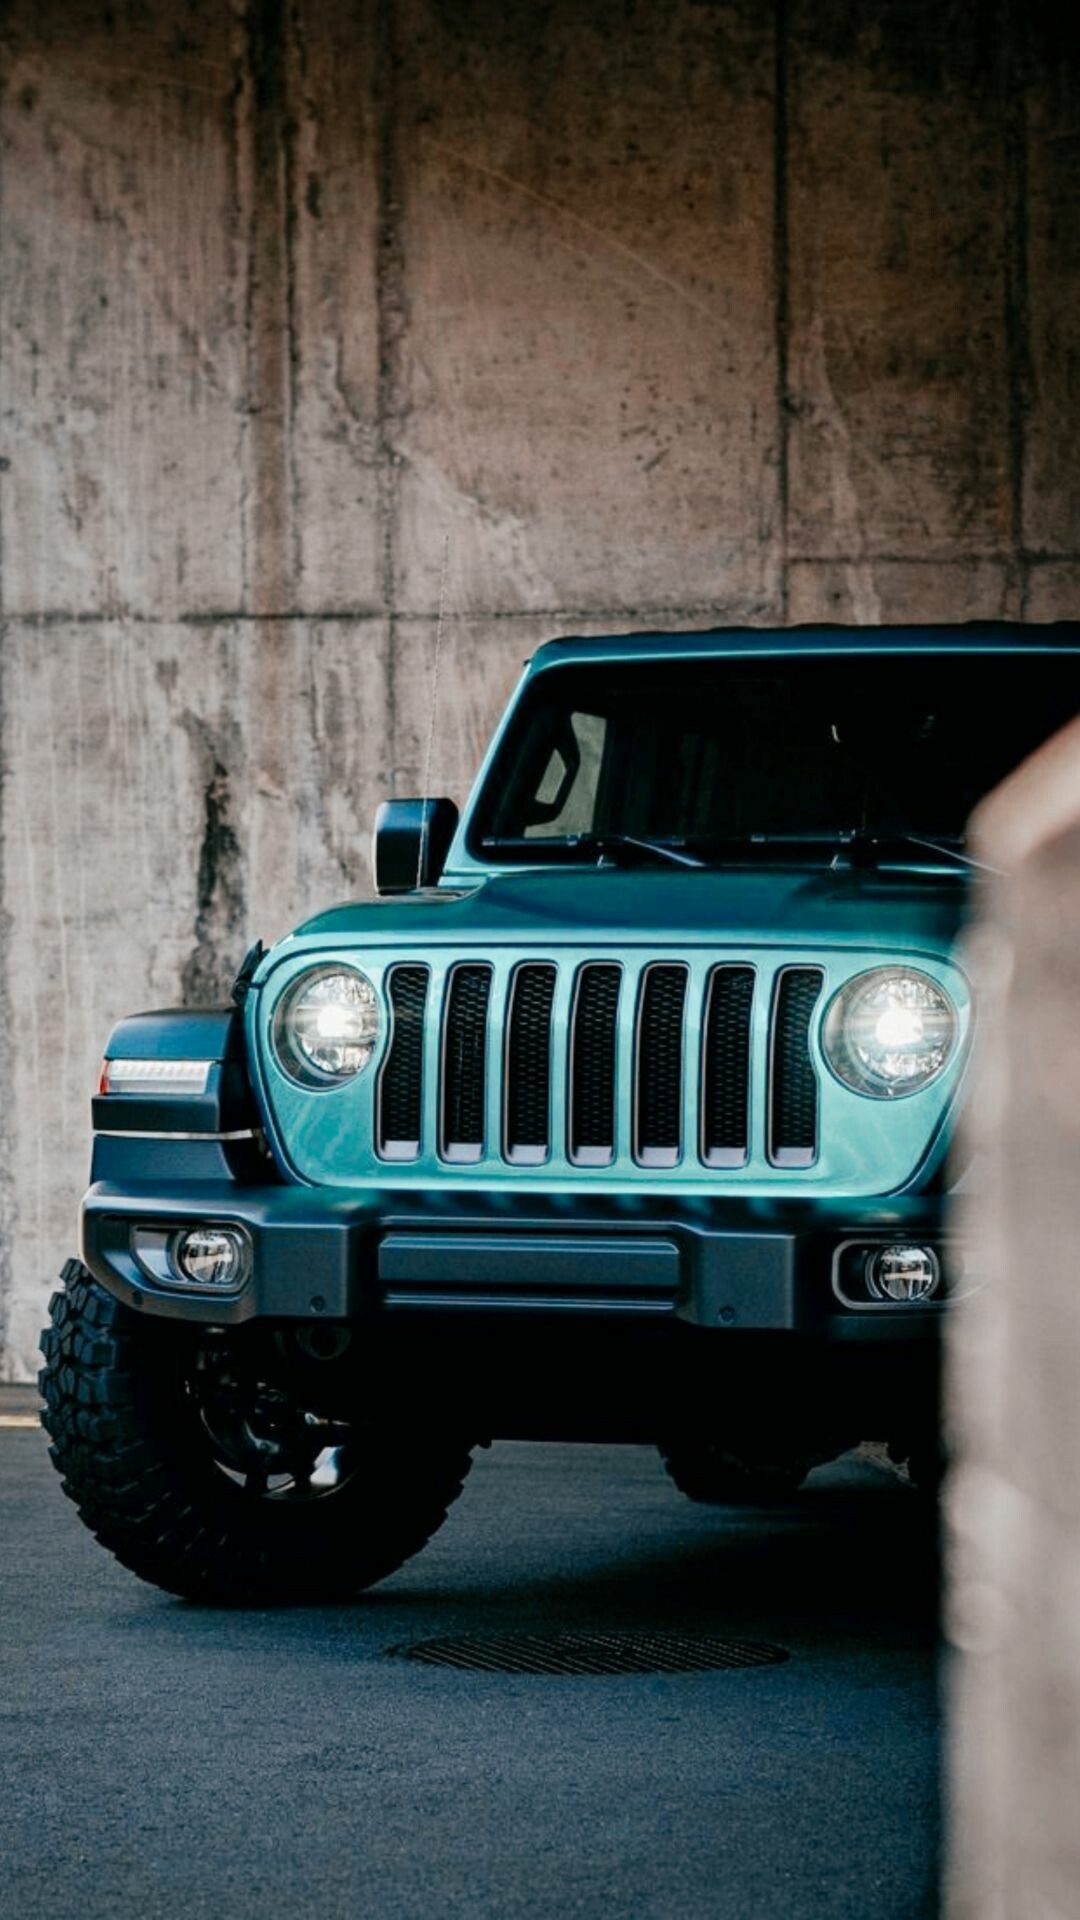 Jeep: Jeep's lineup consists exclusively of rugged off-roading SUVs and crossovers, including the iconic Wrangler. 1080x1920 Full HD Background.